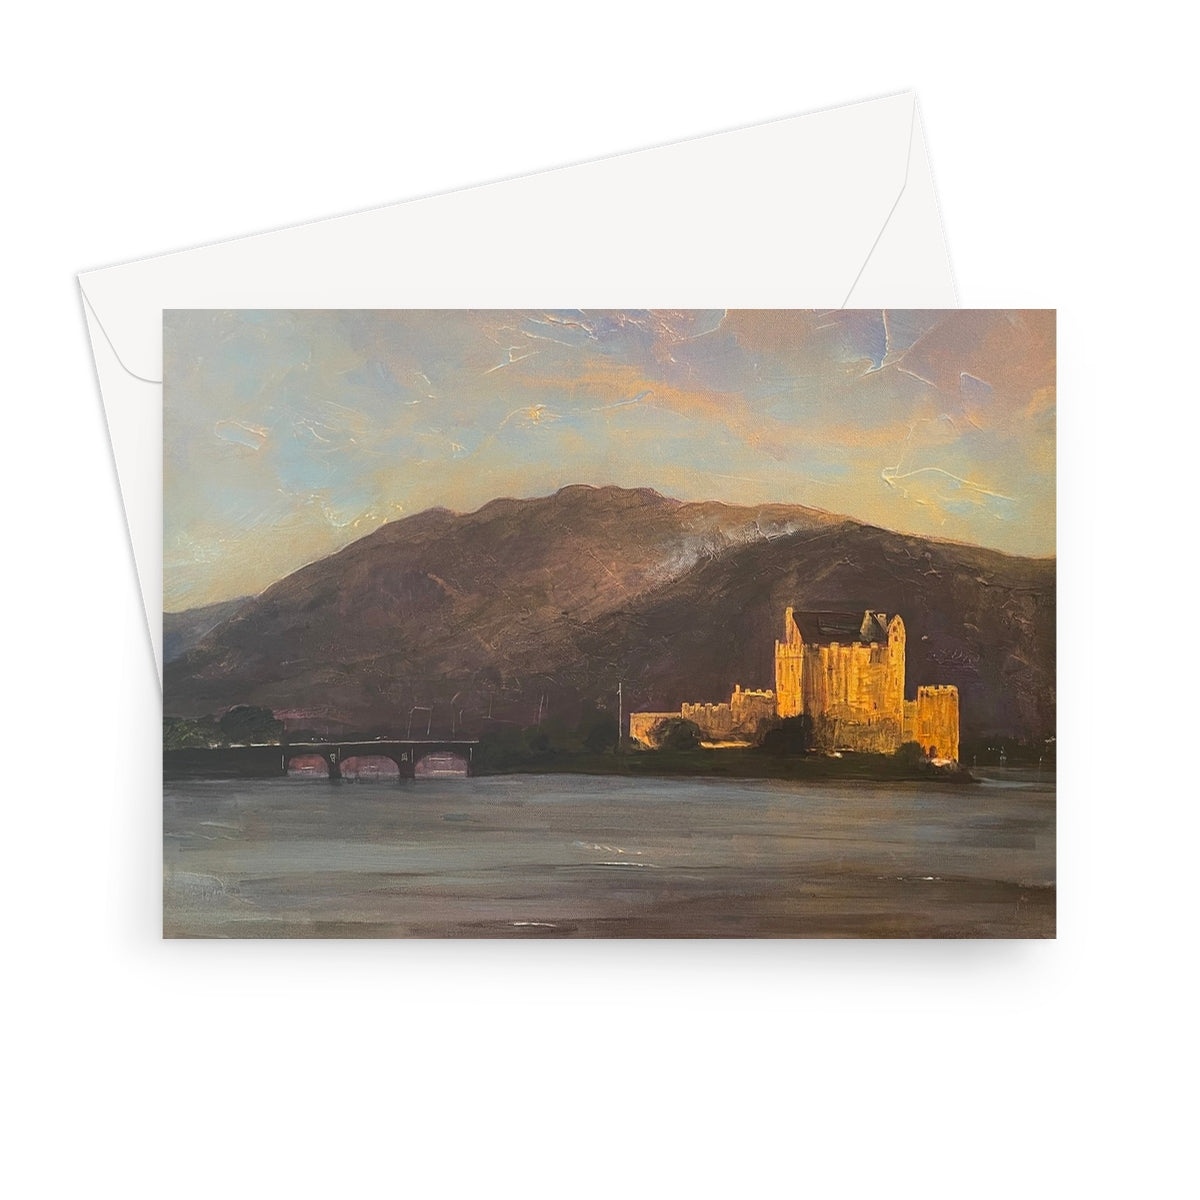 Eilean Donan Castle Art Gifts Greeting Card-Greetings Cards-Historic & Iconic Scotland Art Gallery-7"x5"-1 Card-Paintings, Prints, Homeware, Art Gifts From Scotland By Scottish Artist Kevin Hunter